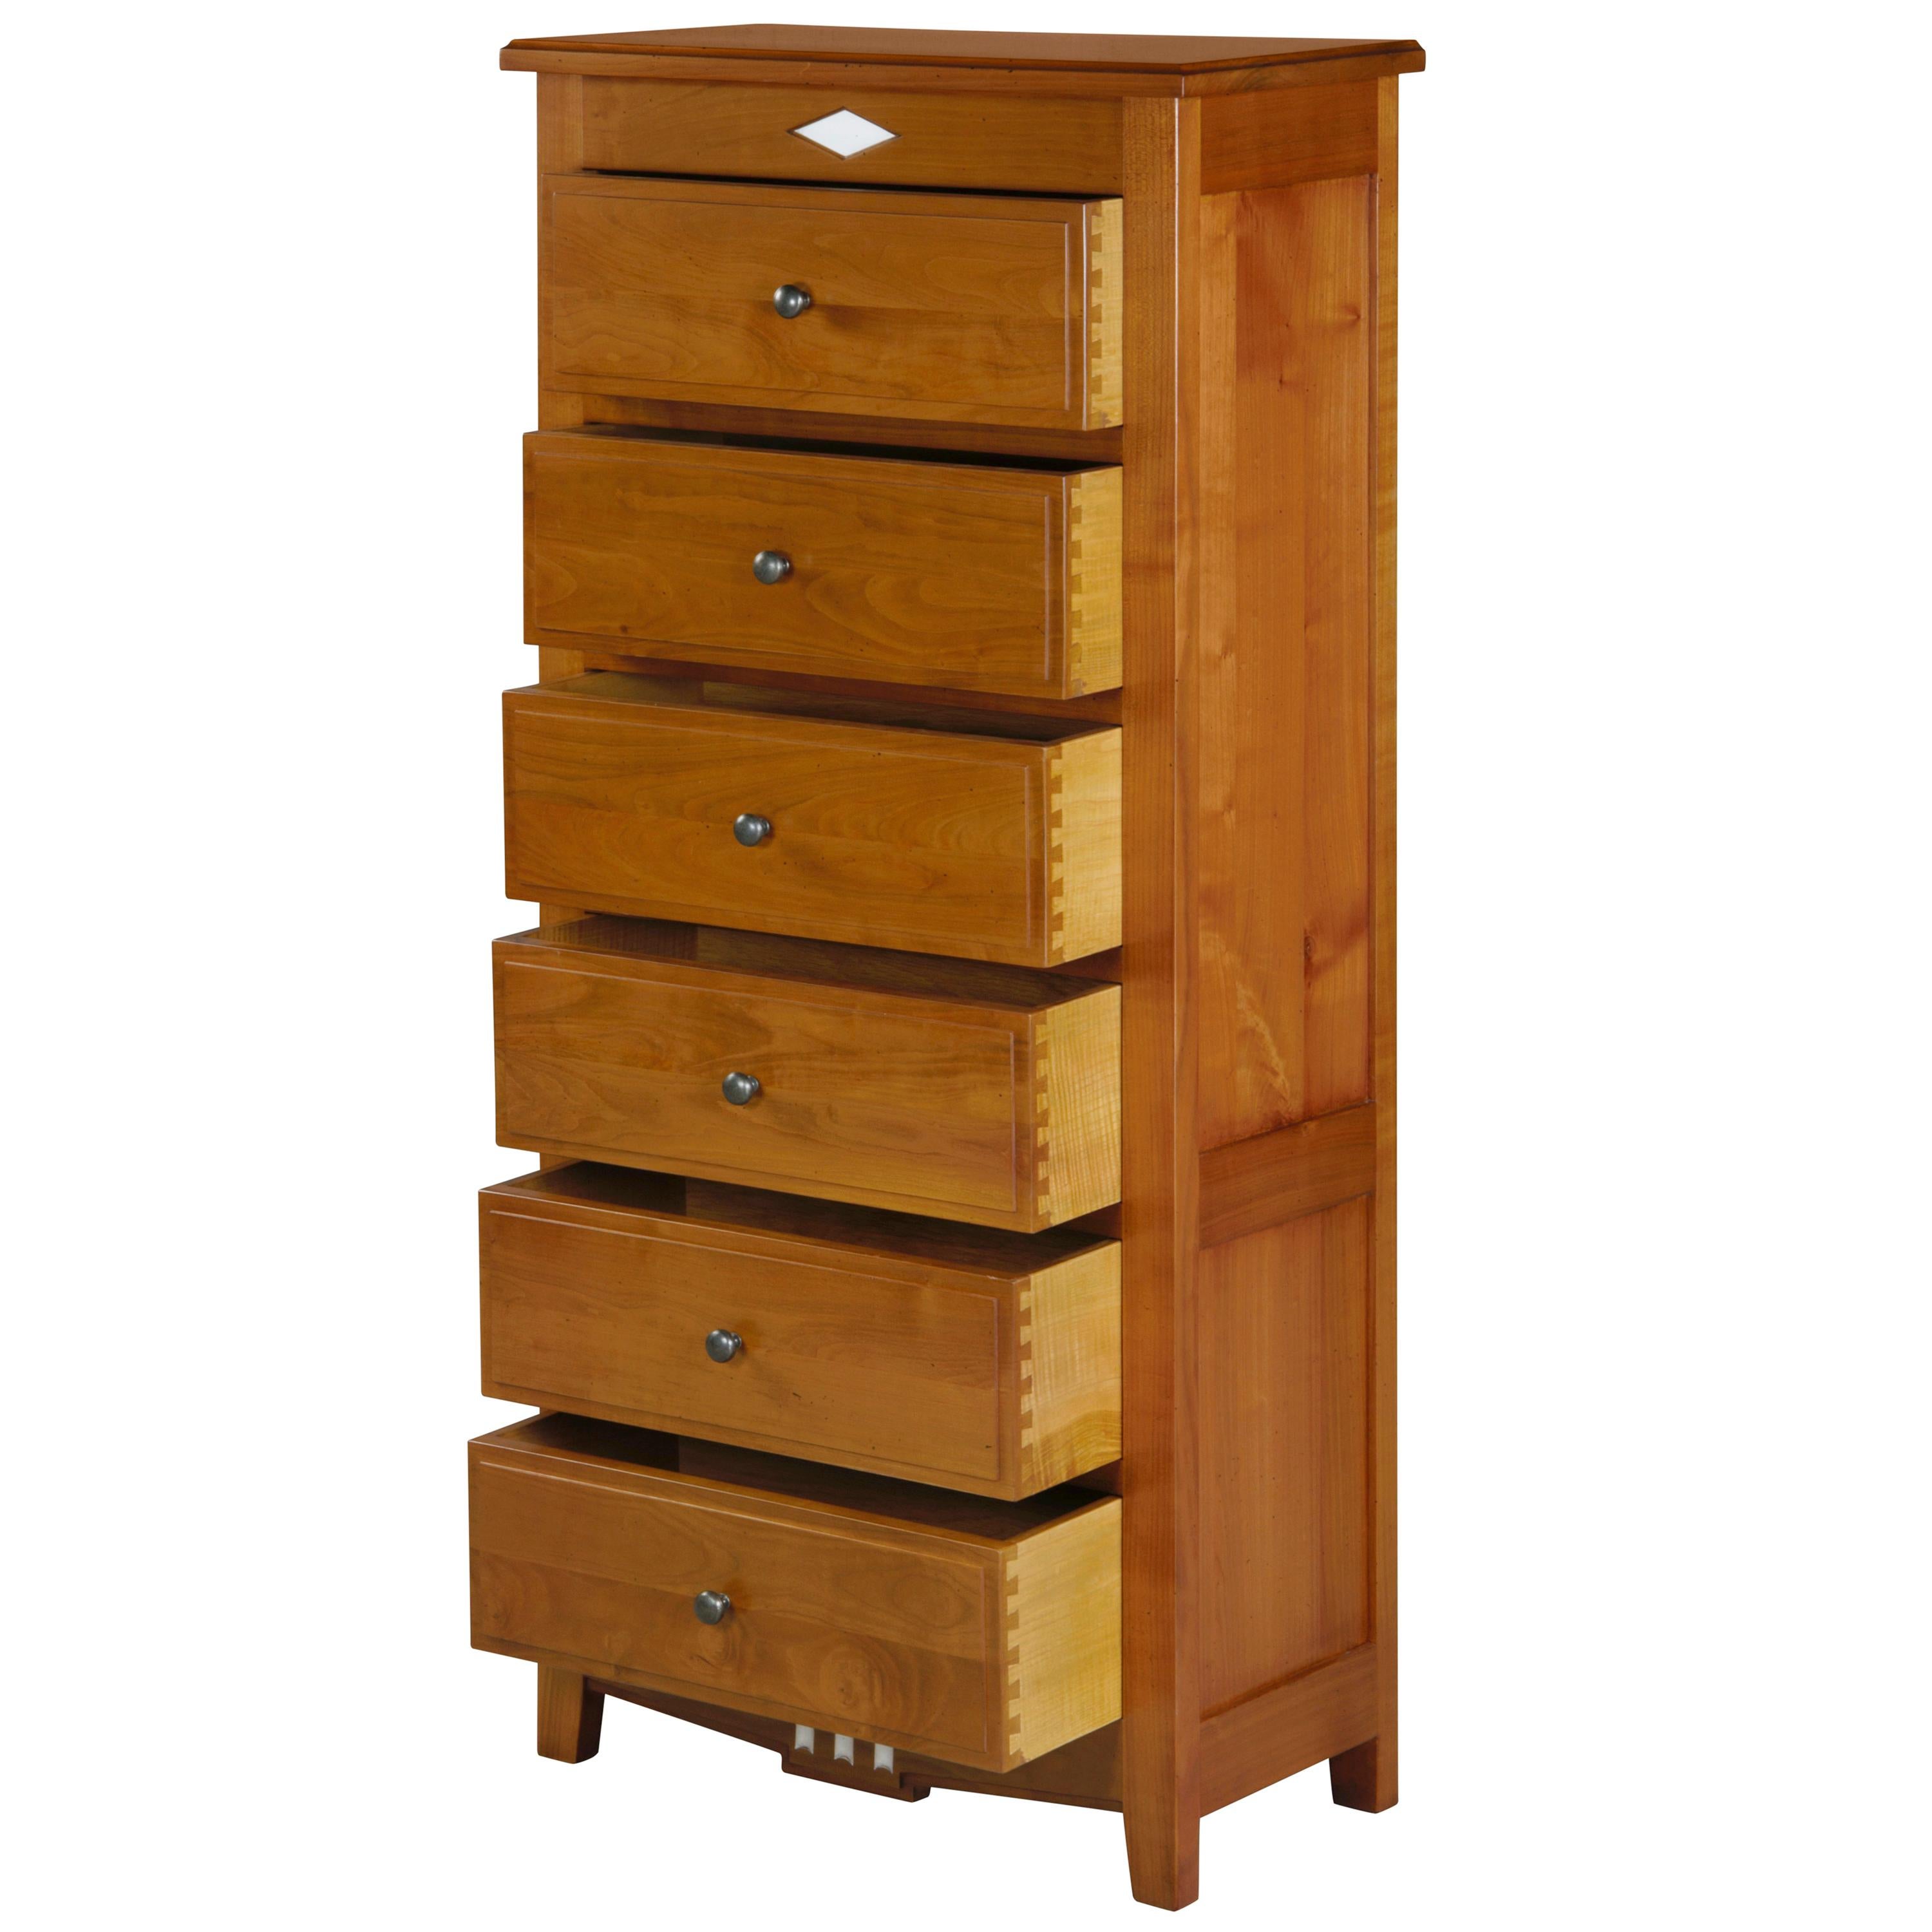 This chiffonnier 6-drawer chest belongs to our MELANIE collection that proposes handcraft modernized reinterpretated pieces of furniture from the French Directoire style at the end of the 18th century. This period was remarkable with its straight,